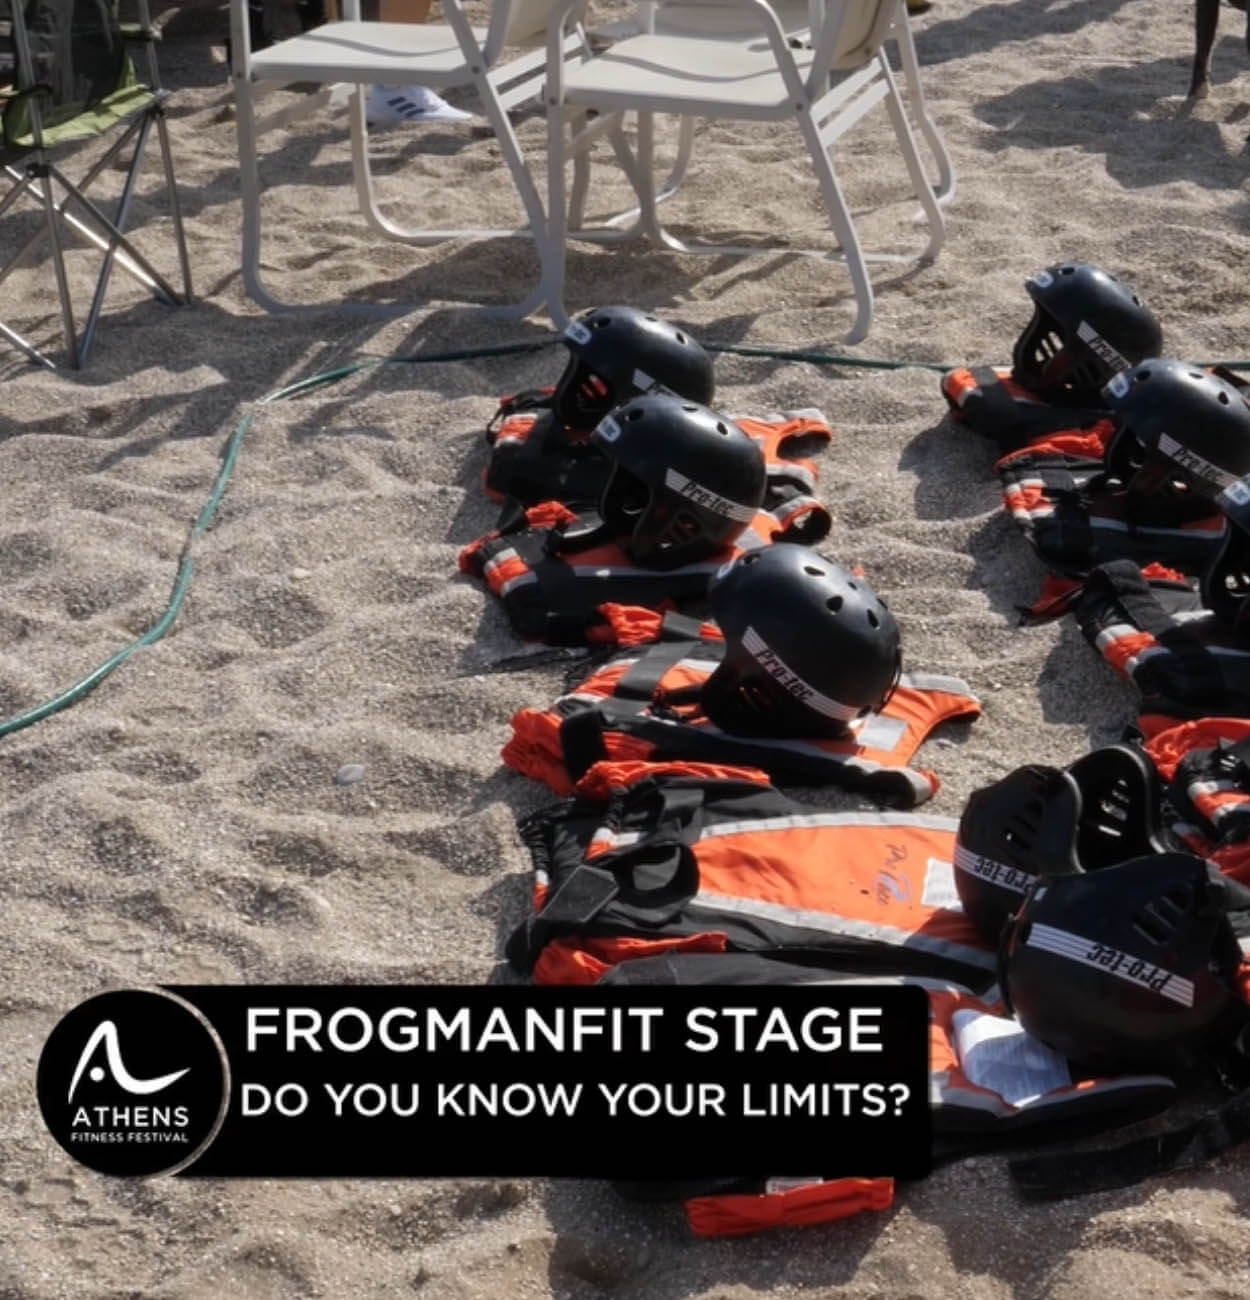 FrogmanFit Stage | DO YOU KNOW YOUR LIMITS?